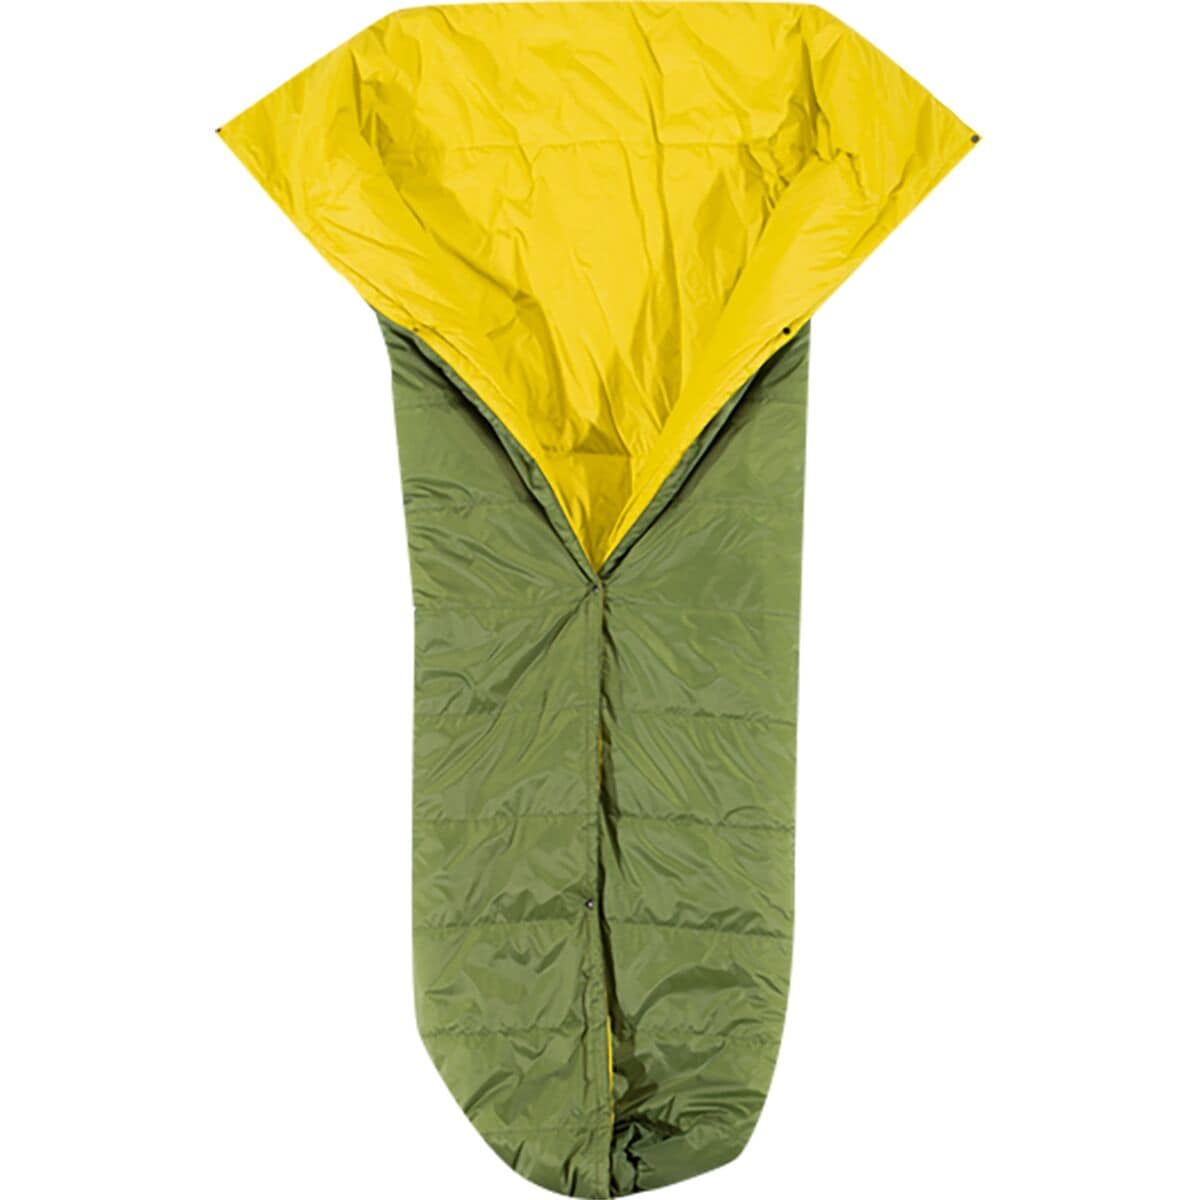  Eagles Nest Outfitters Spark Camp Quilt - Hike & Camp